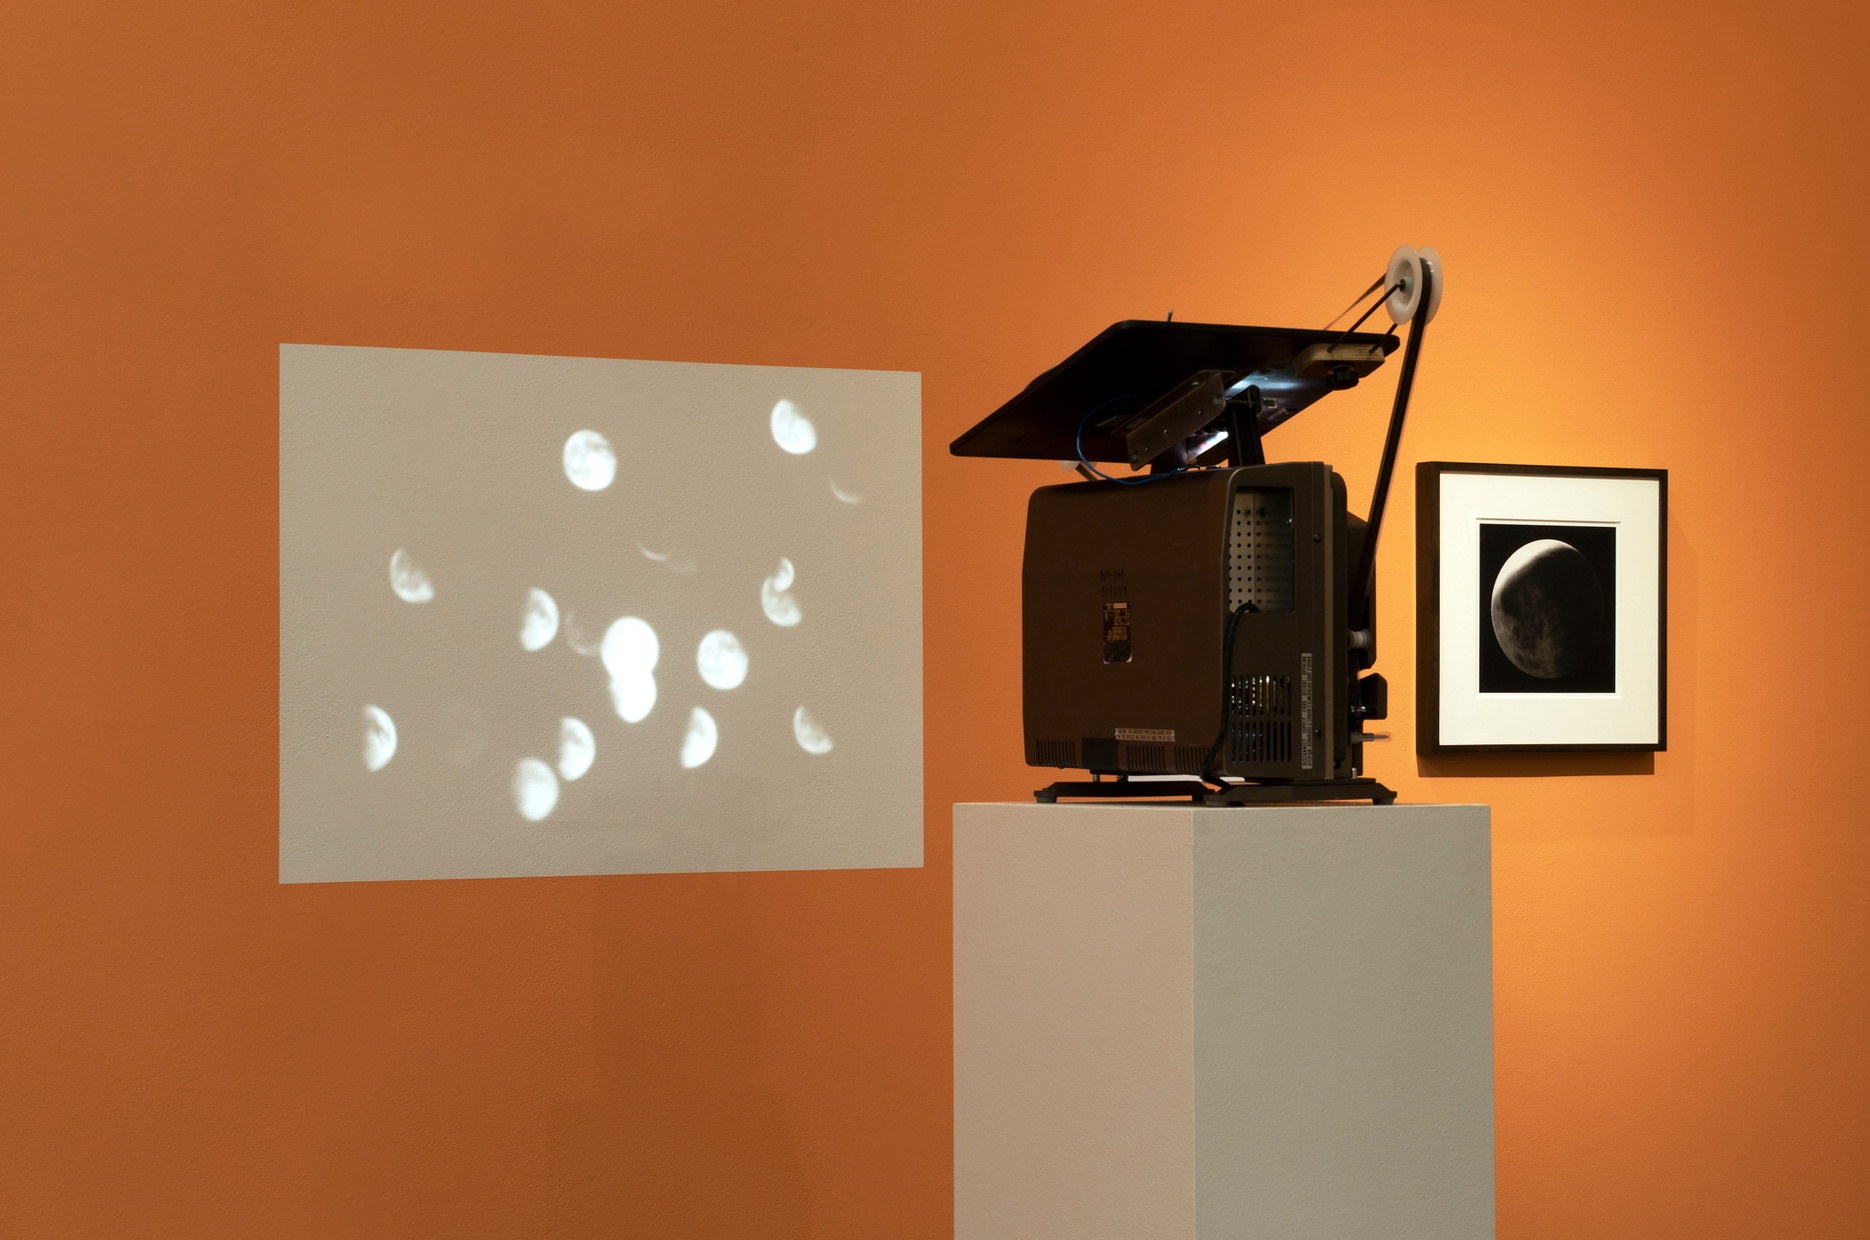 A projector sits on a gray pedestal and projects an image of a cluster of full, half, and crescent moons onto an orange wall, next to a framed photograph.